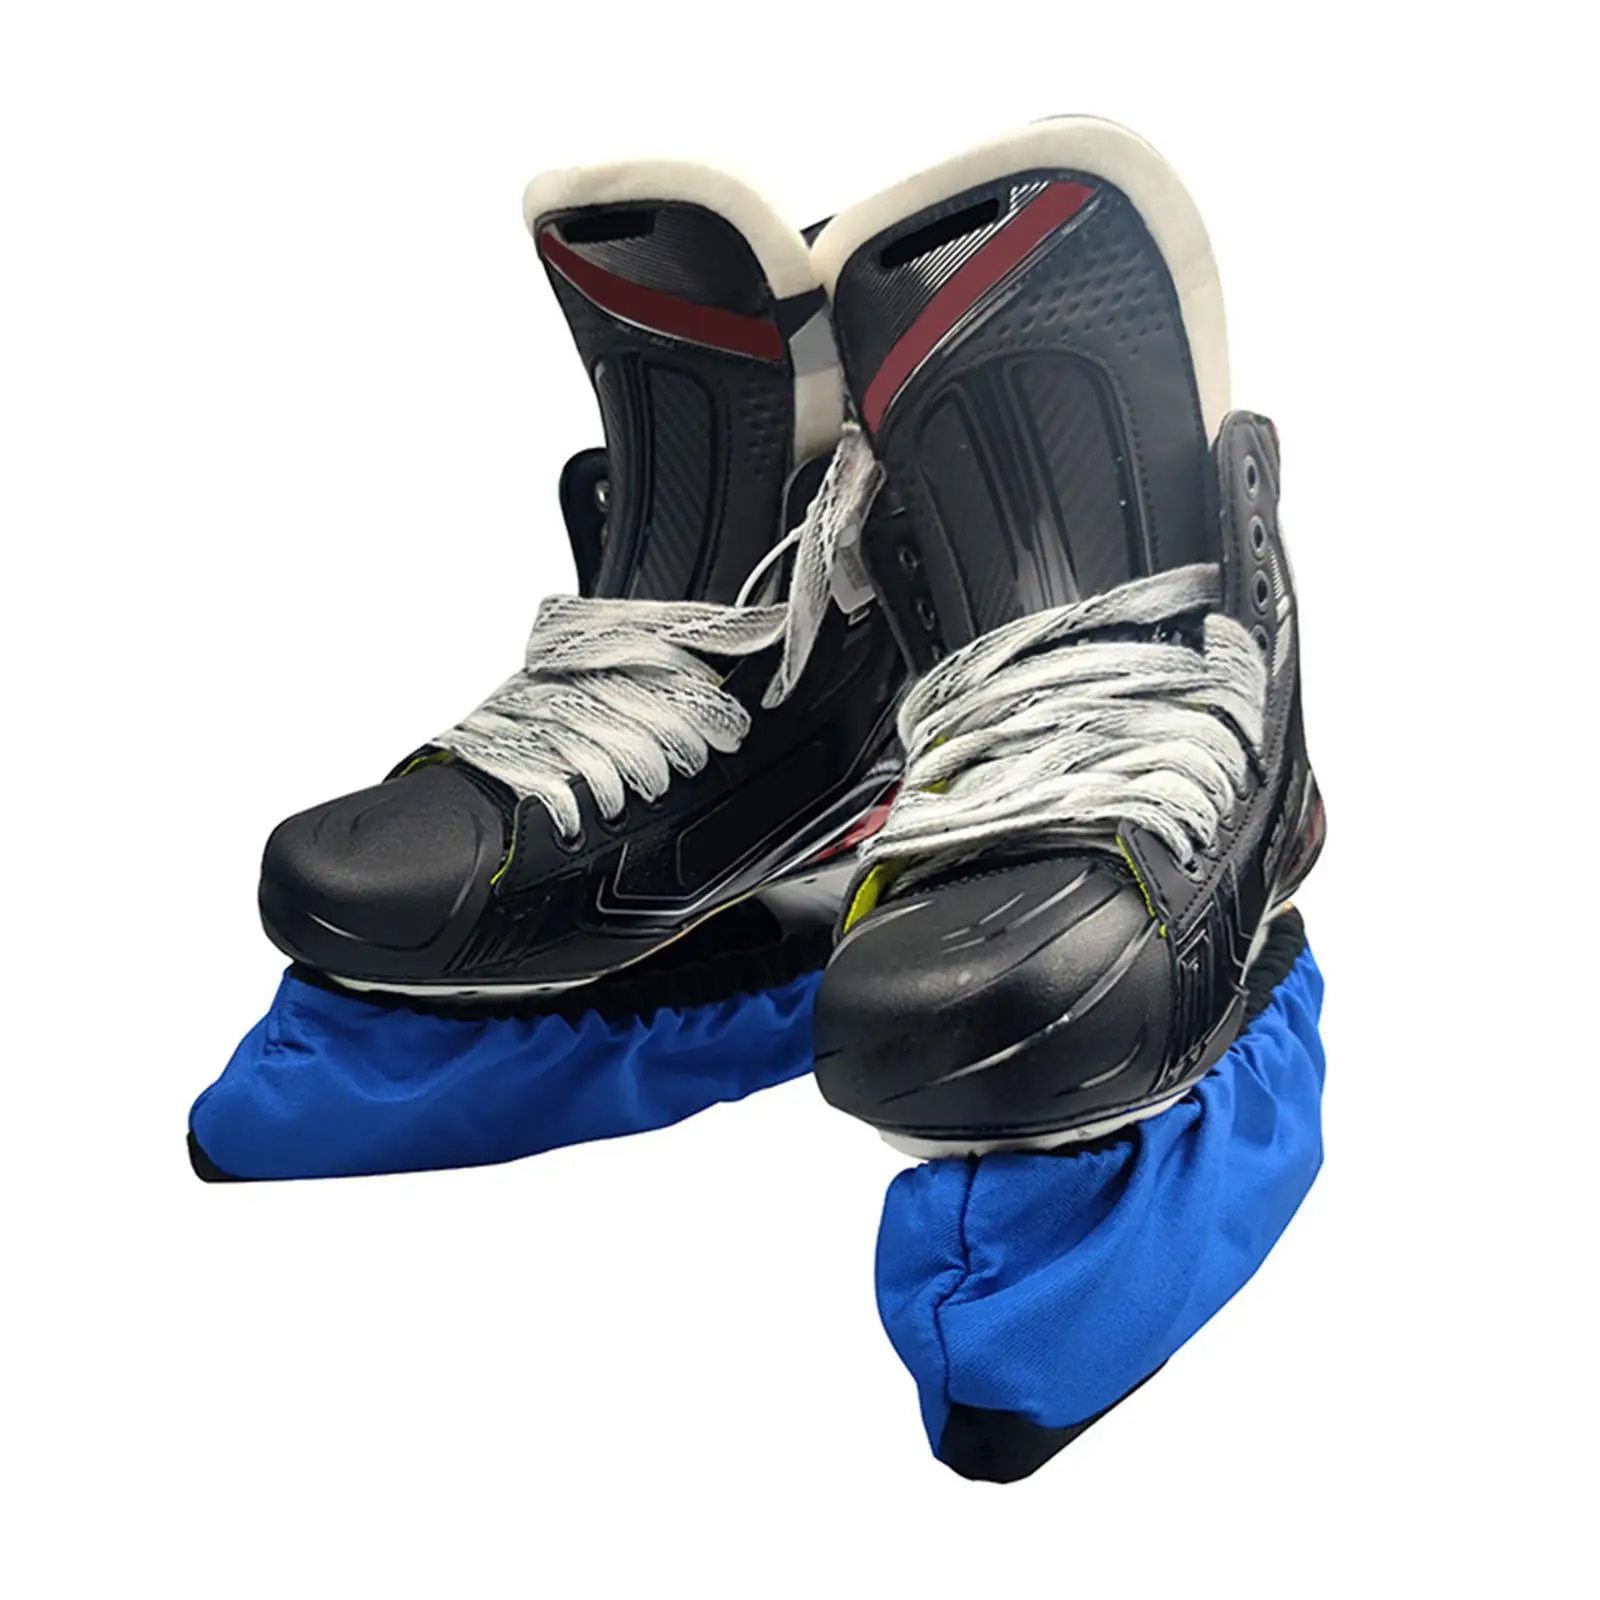 Ice Skate Blade Covers Figure Ice Roller Skates Boot Covers Overshoes Skating Guard Equipment Protection for Kids Adult